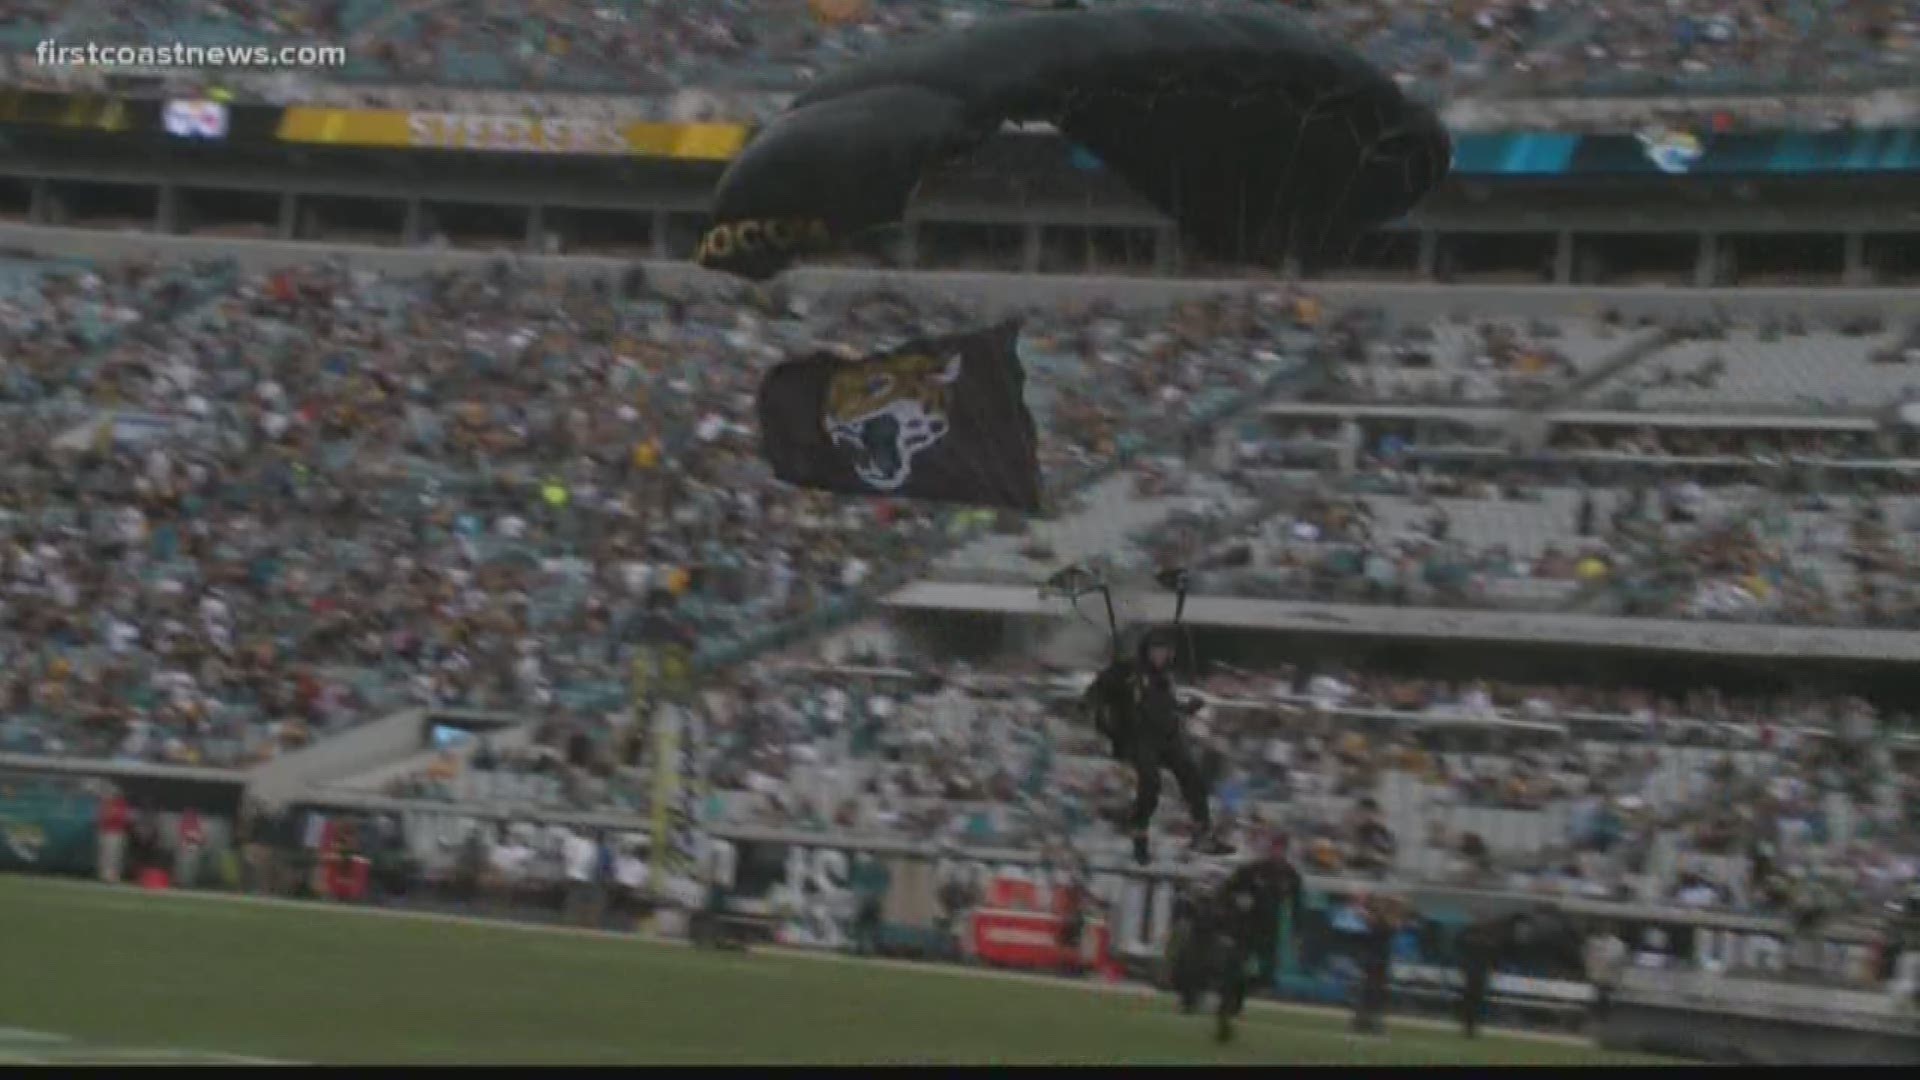 The Special Operations Command Paracommandos parachuted into TIAA Bank Field on Sunday. Dozens of Special Operators, including reserve forces and Department of Defense civilians, make up the team which performs in events around the country.